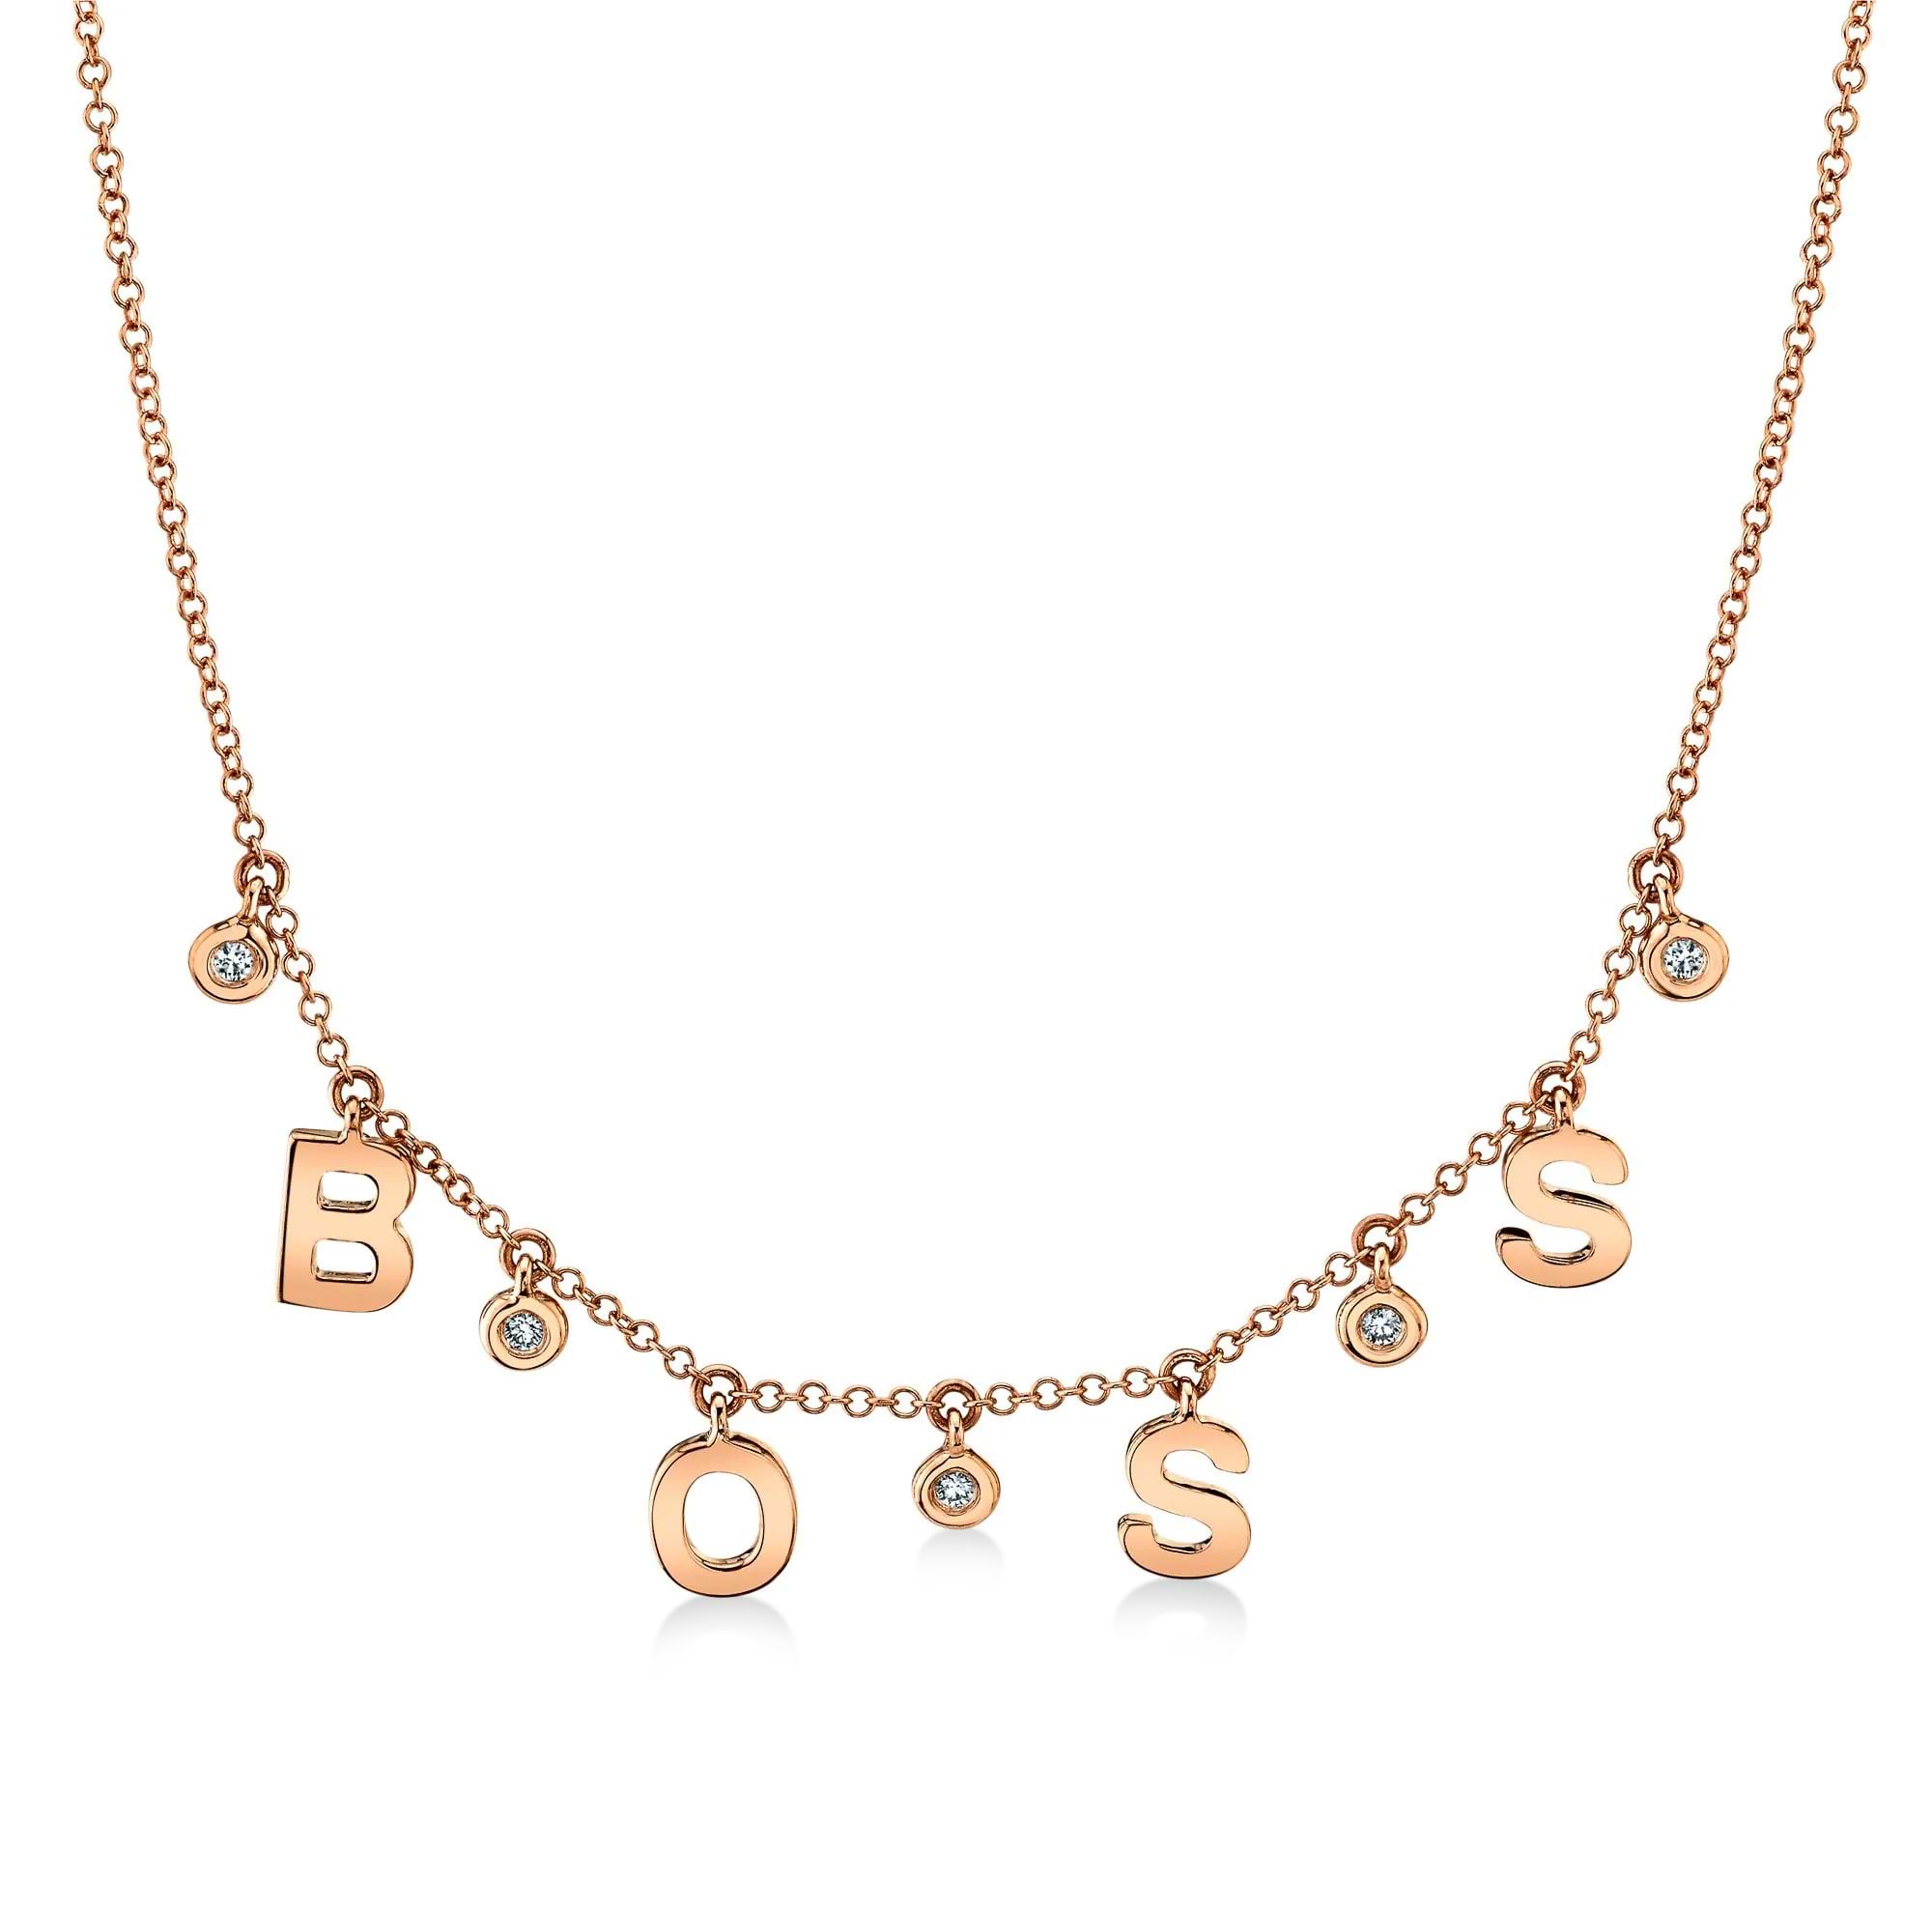 Diamond Boss Spelled Out Pendant Necklace 14k Rose Gold  (0.06ct)